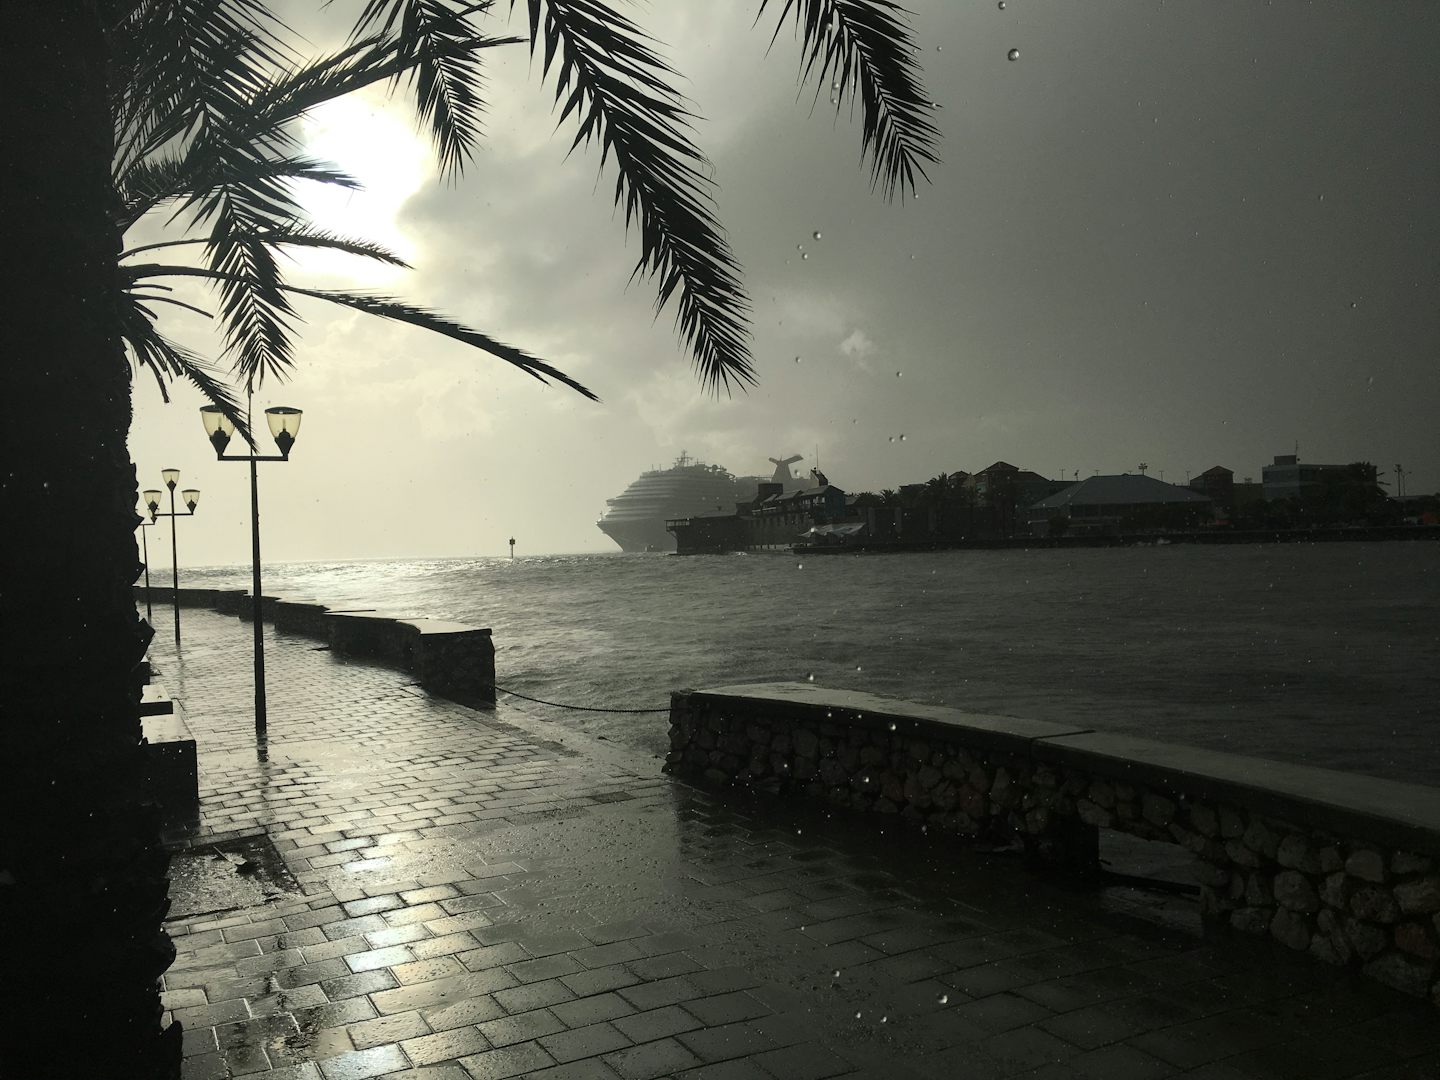 Stormy rainy day in Curaçao as Carnival Vista is in Curaçao